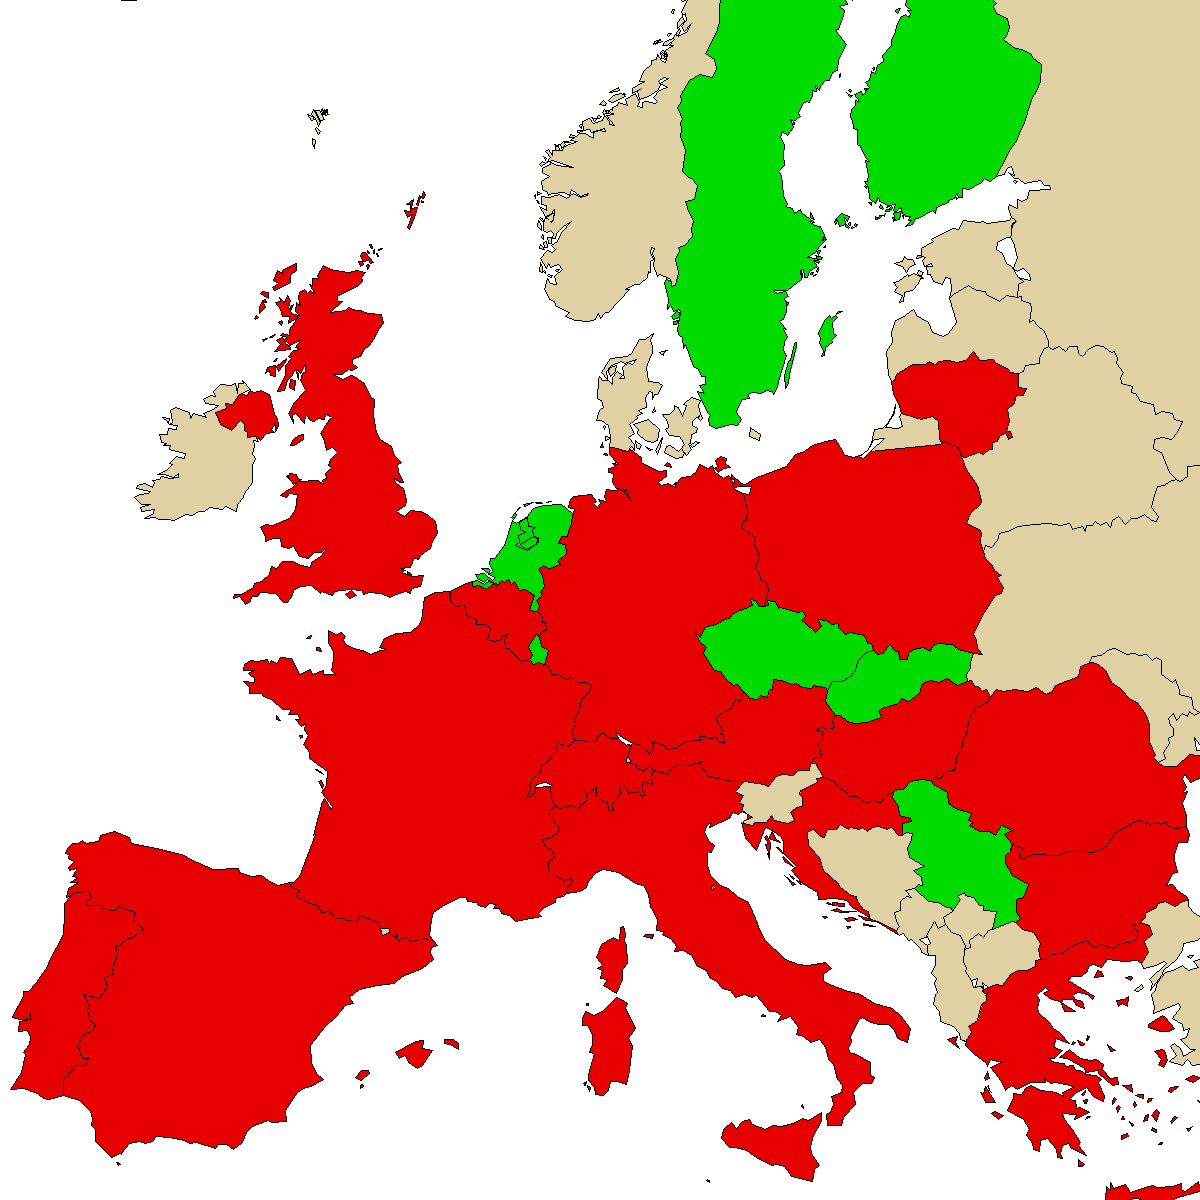 legal info map for our product 2MMC, green are countries where we found no ban, red with ban, grey is unknown